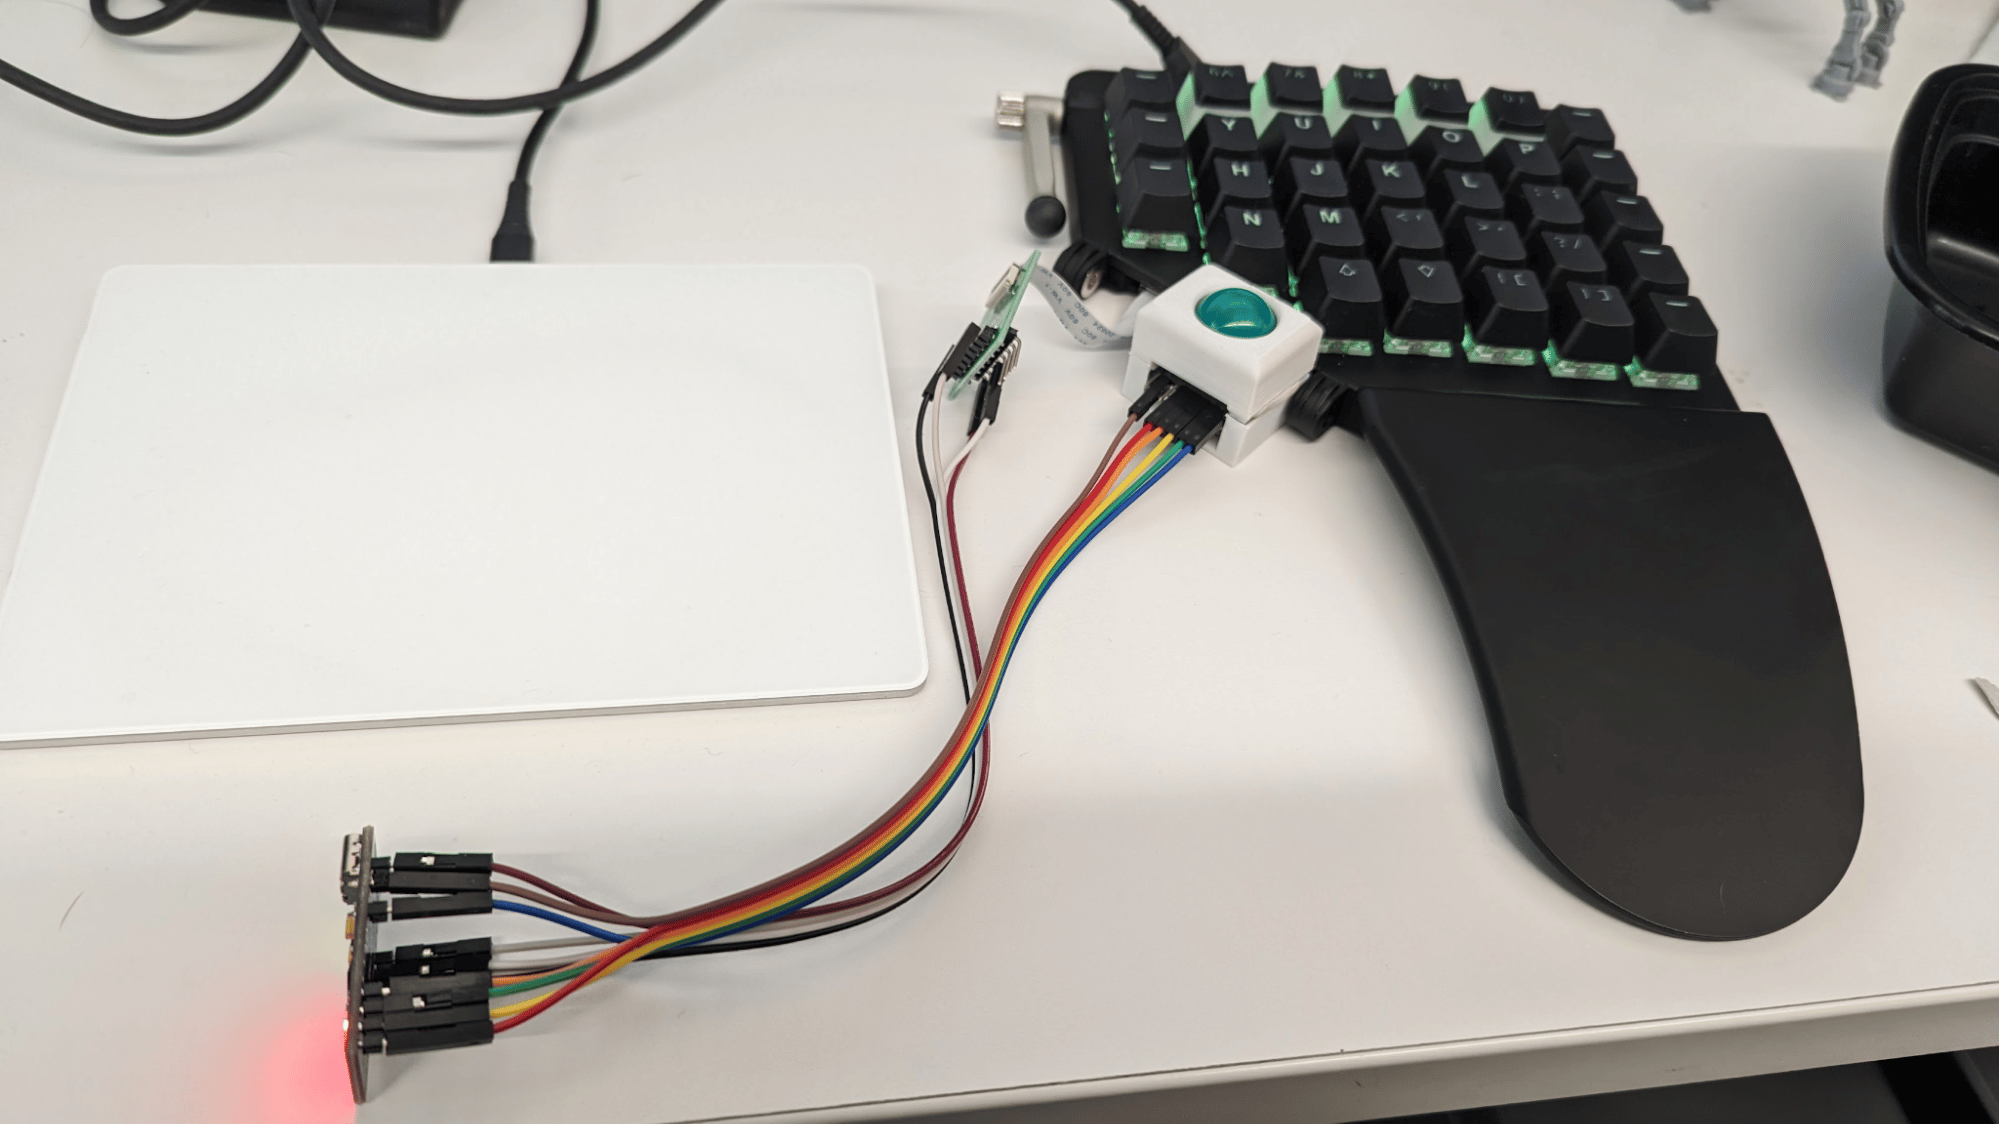 A picture of an early prototype of the Moonrover. The right trackpad for the Moonlander is completely gone, and in it's place is a trackball housing with a bunch of wires running to a microcontroller, which then has a bunch of wires running back to a ribbon cable breakout board, which is connected to the keyboard.